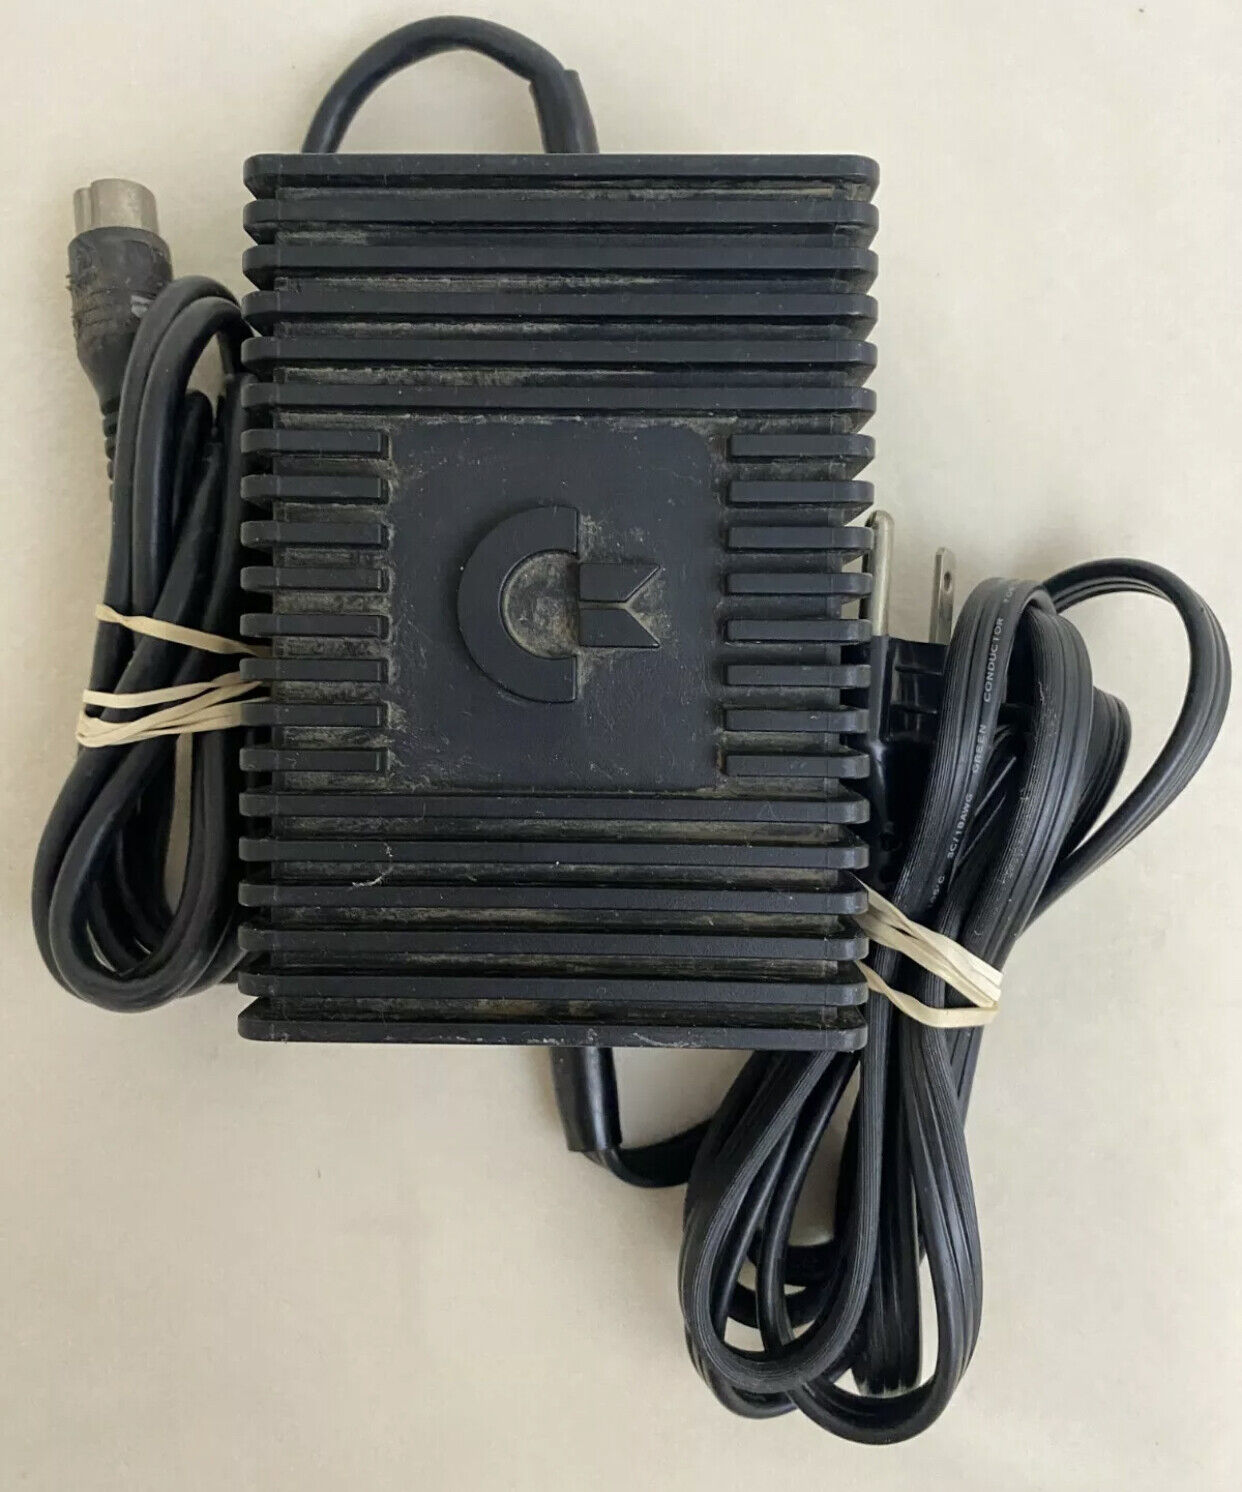 Vintage OEM Commodore 64 C64 Computer Power Supply Adapter BLACK 4 Pin 251053-02